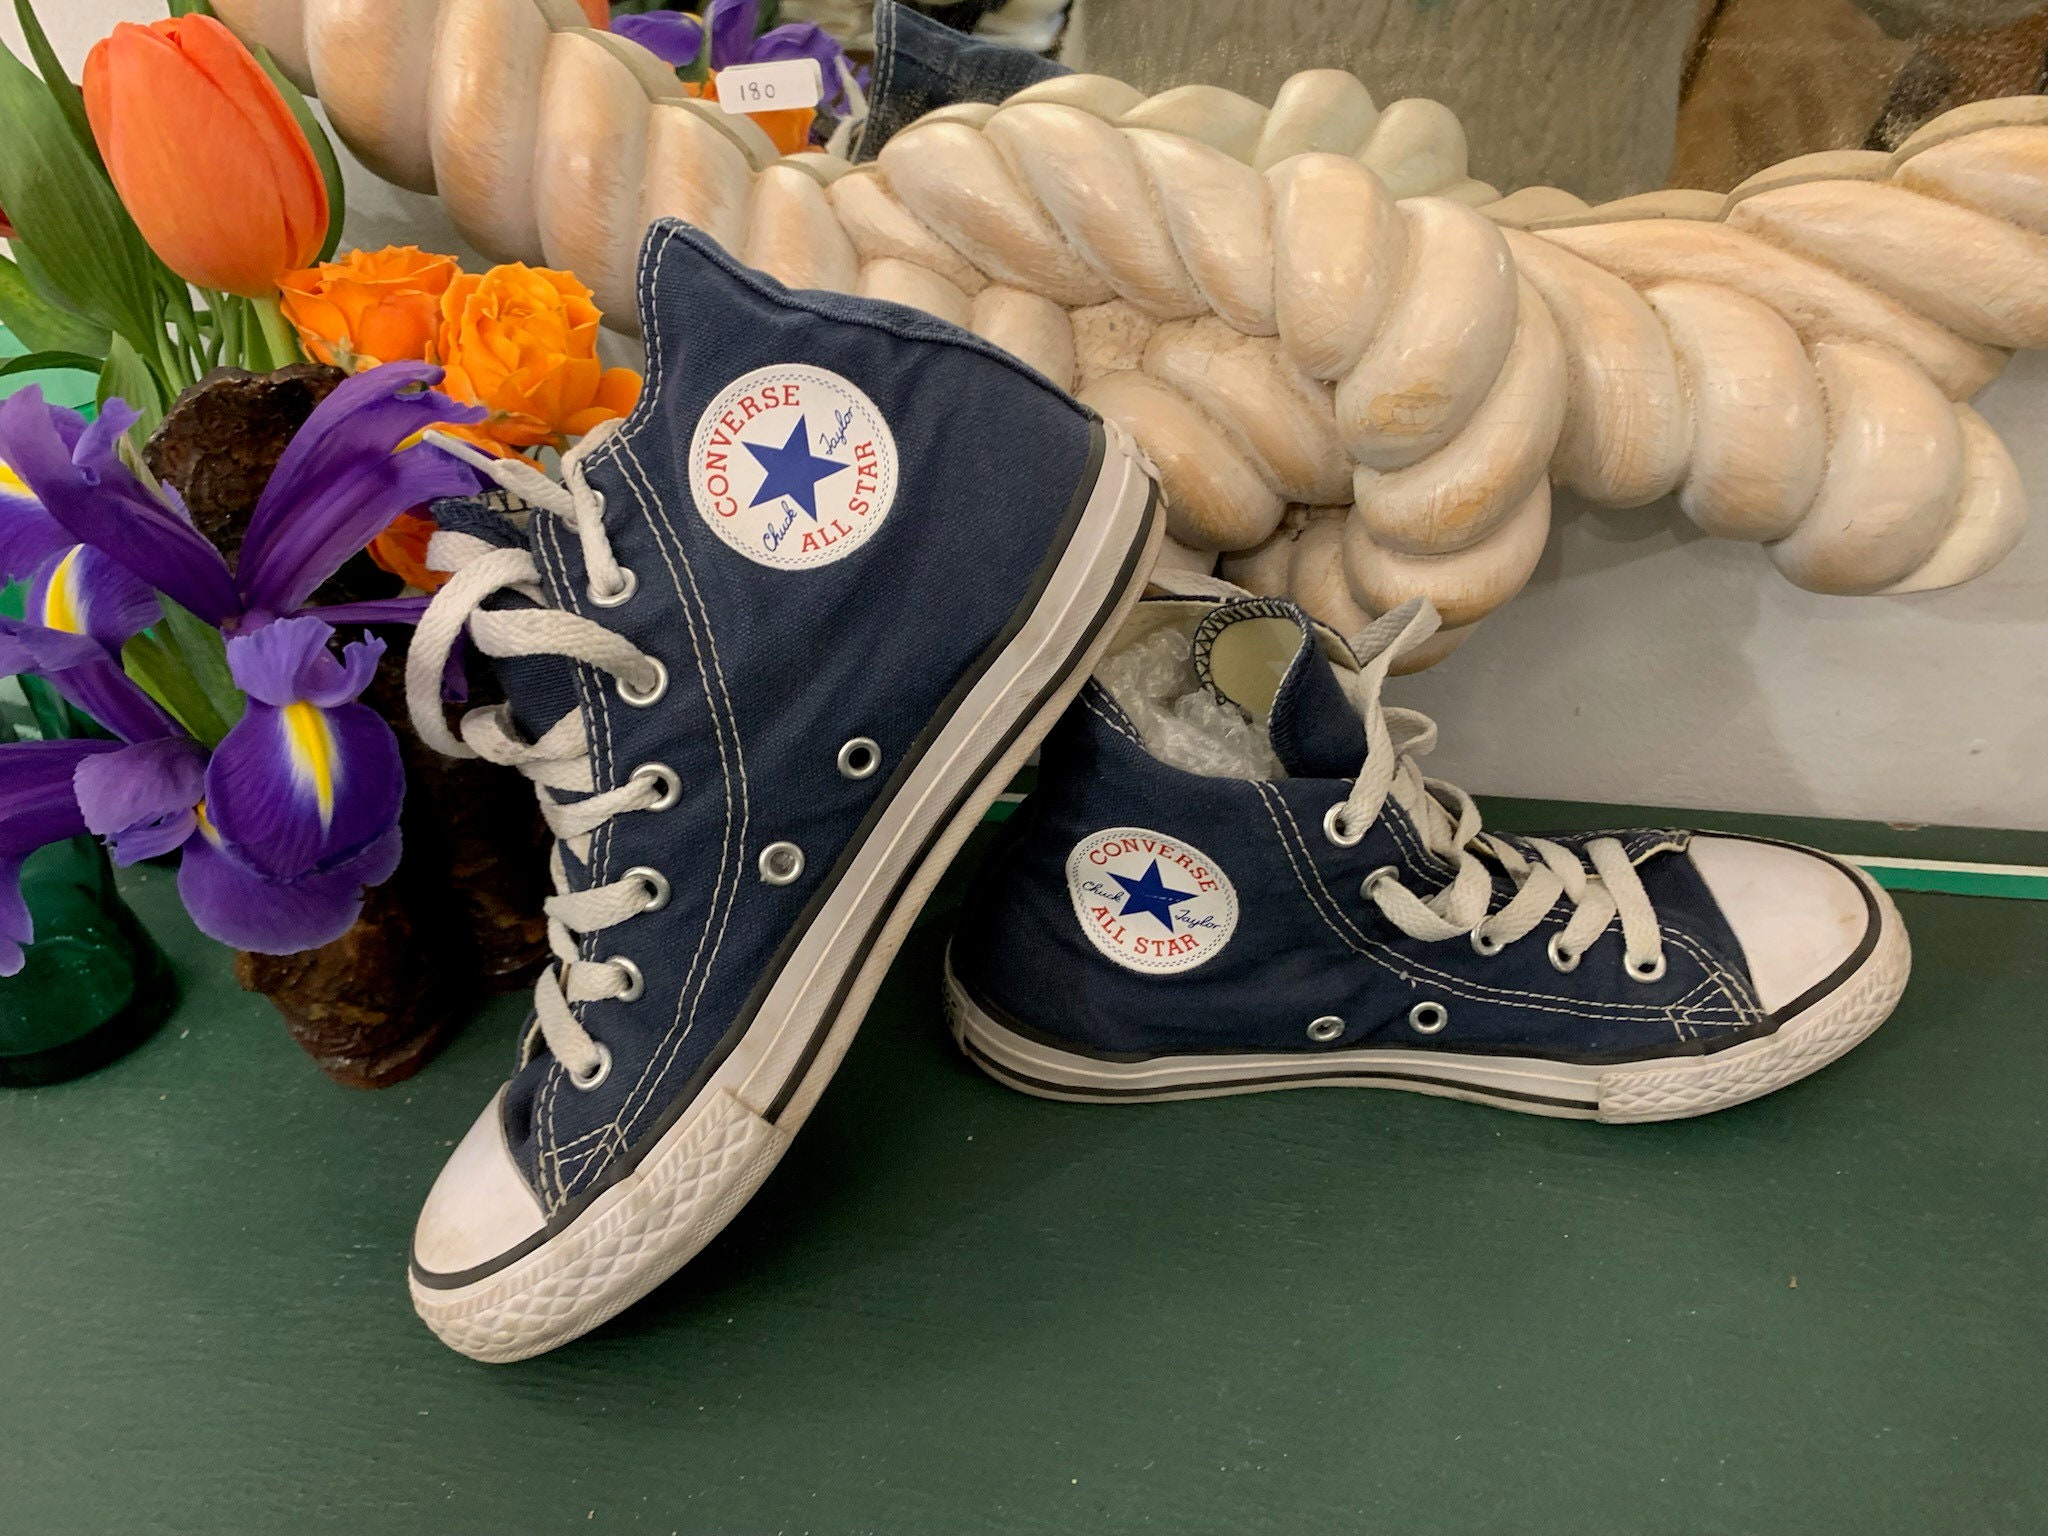 One Converse Etsy